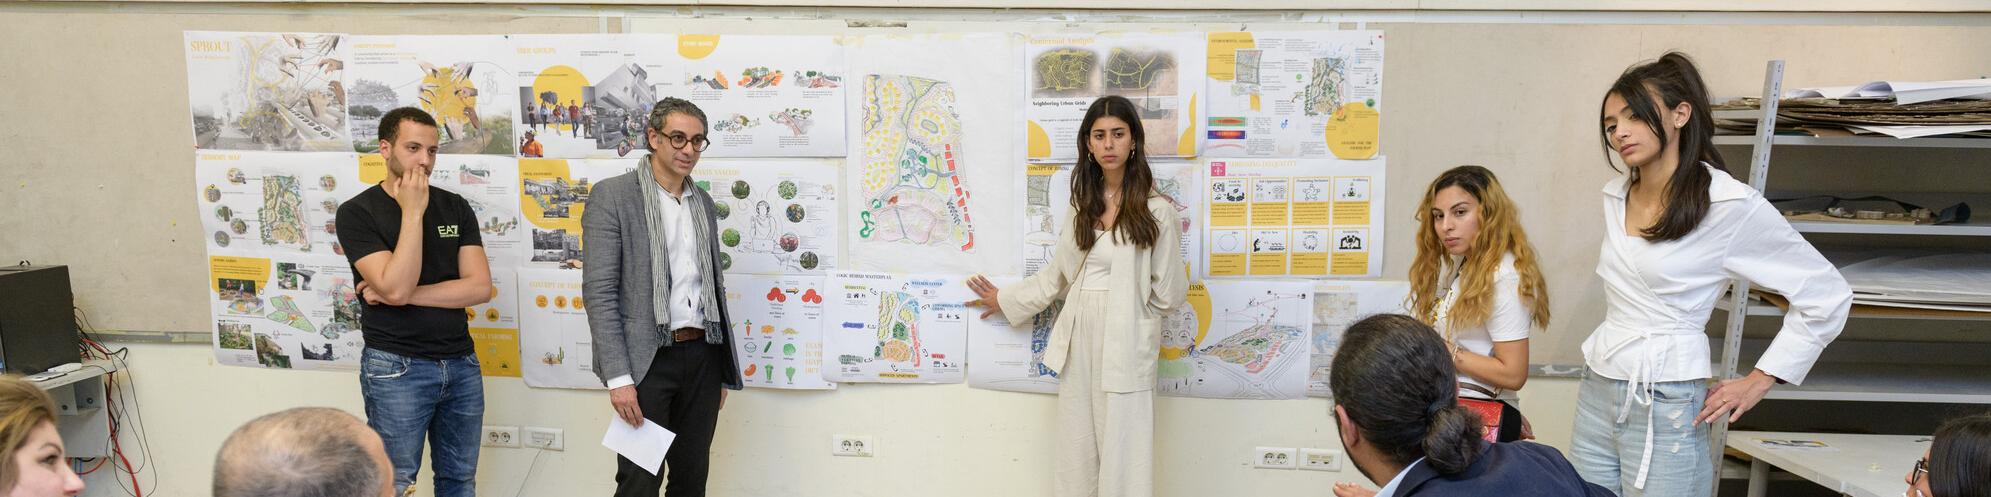 an architecture student presenting her work in front a jury 